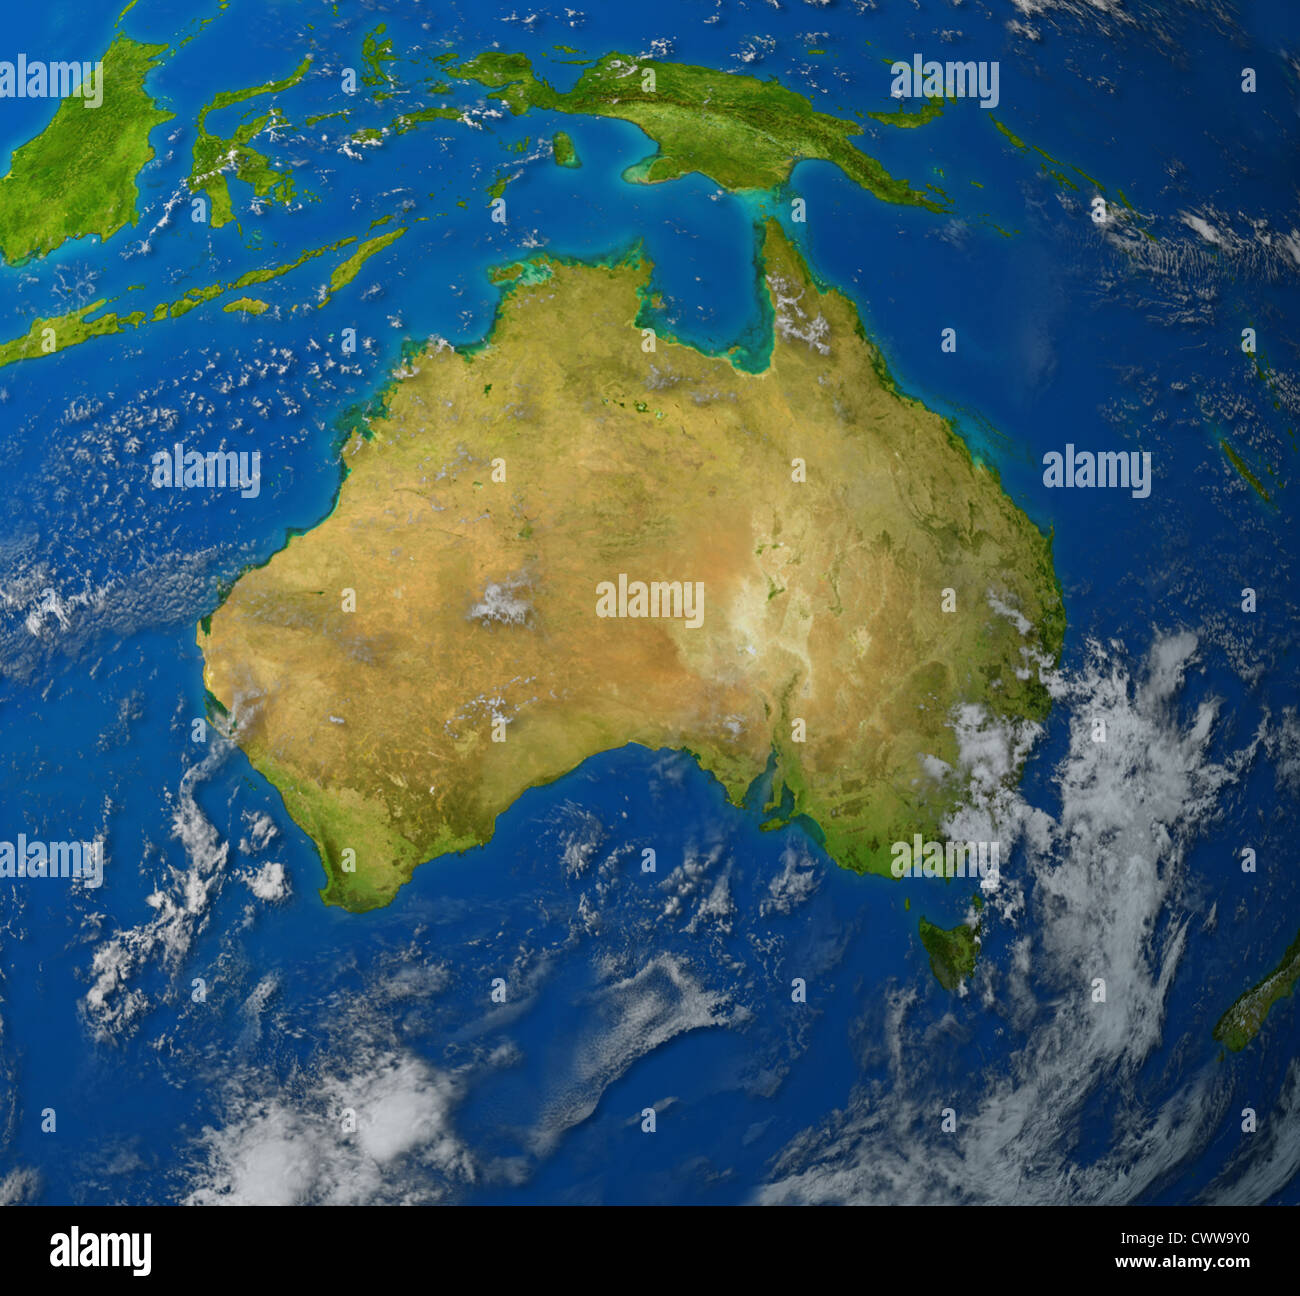 Australia realistic map of the continent of Oceana in the pacific region of asia representing the Ozzies and the land of Aussie. Stock Photo